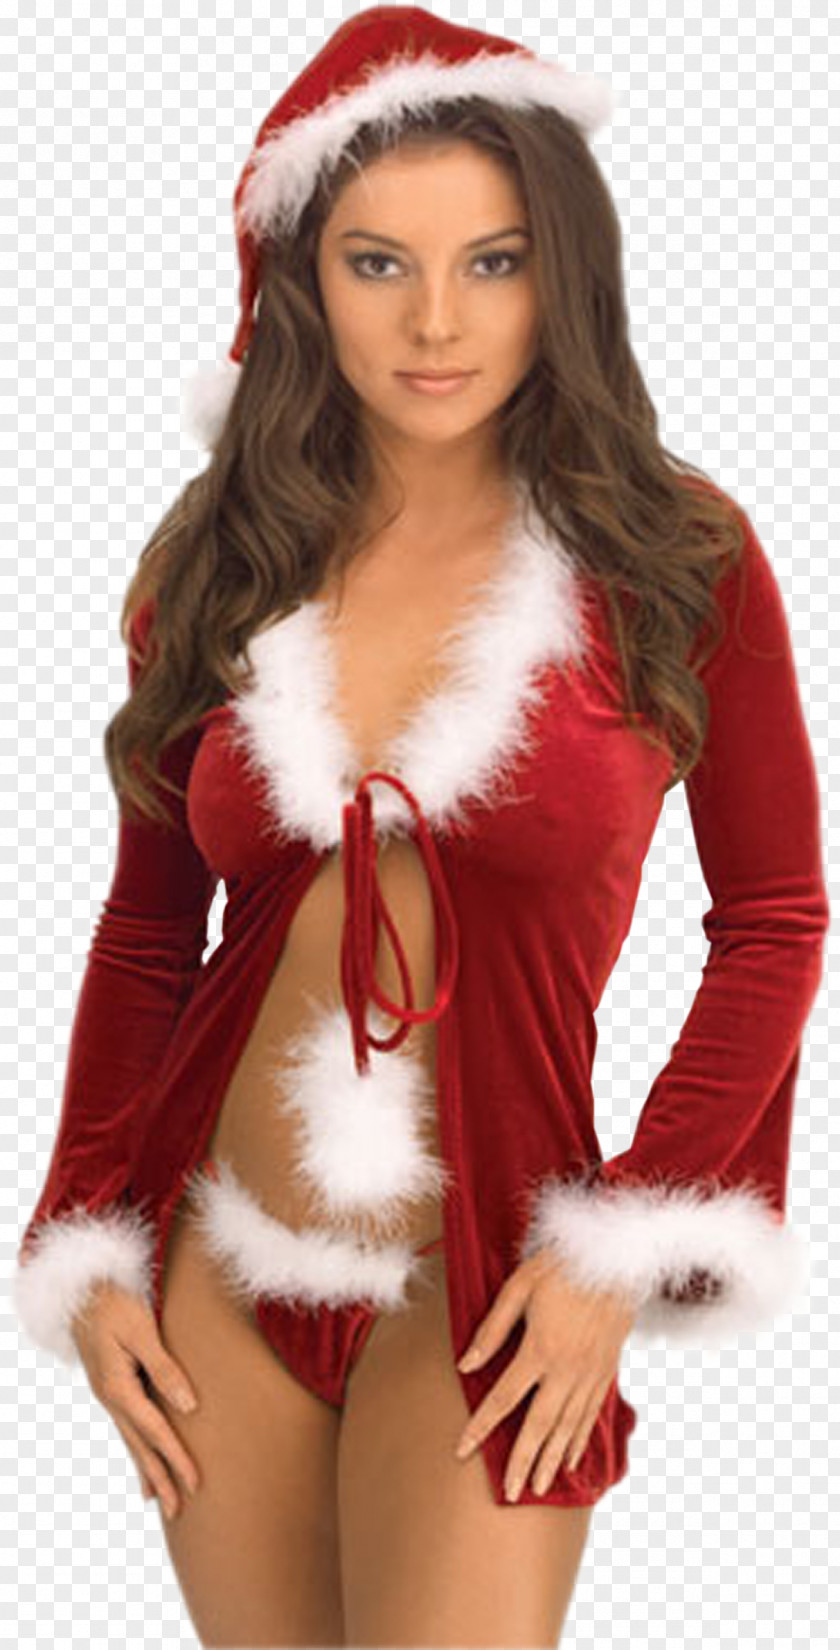 Three-piece The Santa Clause Mrs. Claus Christmas Elf PNG